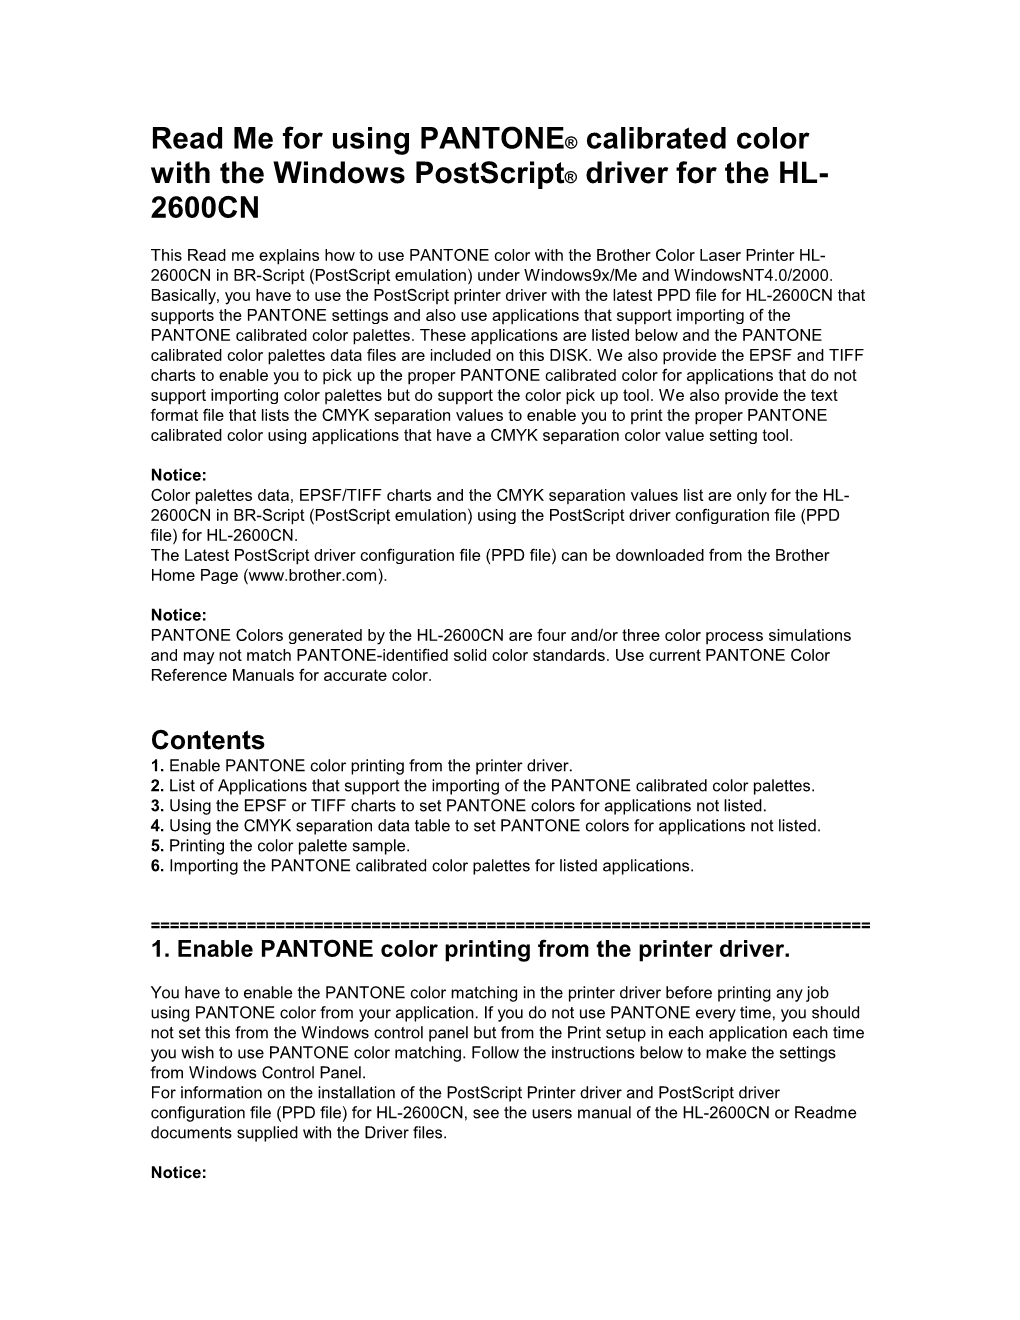 Read Me for Using PANTONE® Calibrated Color with the Windows Postscript® Driver for the HL- 2600CN